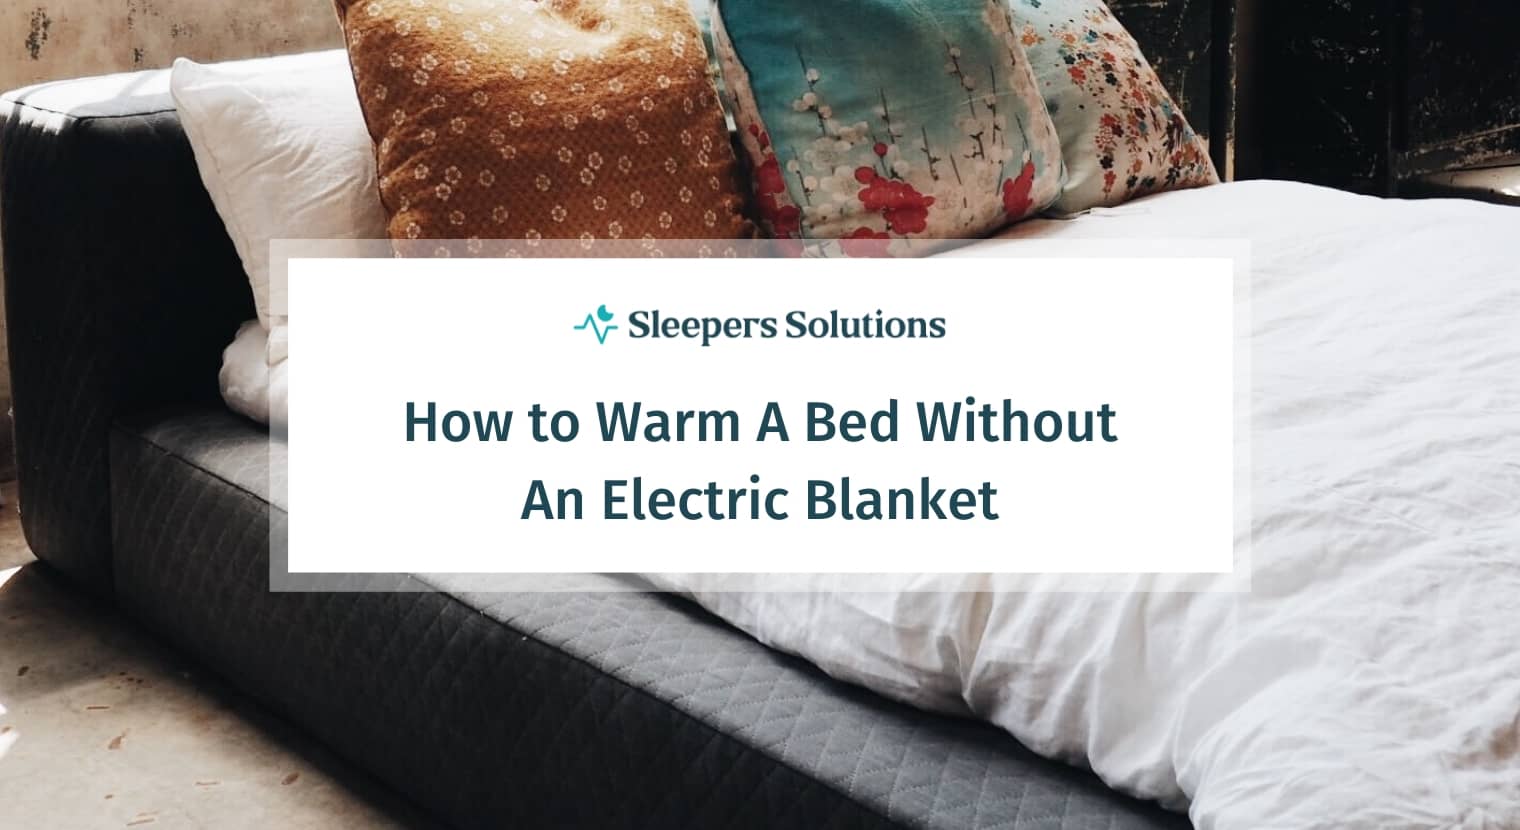 How to Warm A Bed Without An Electric Blanket